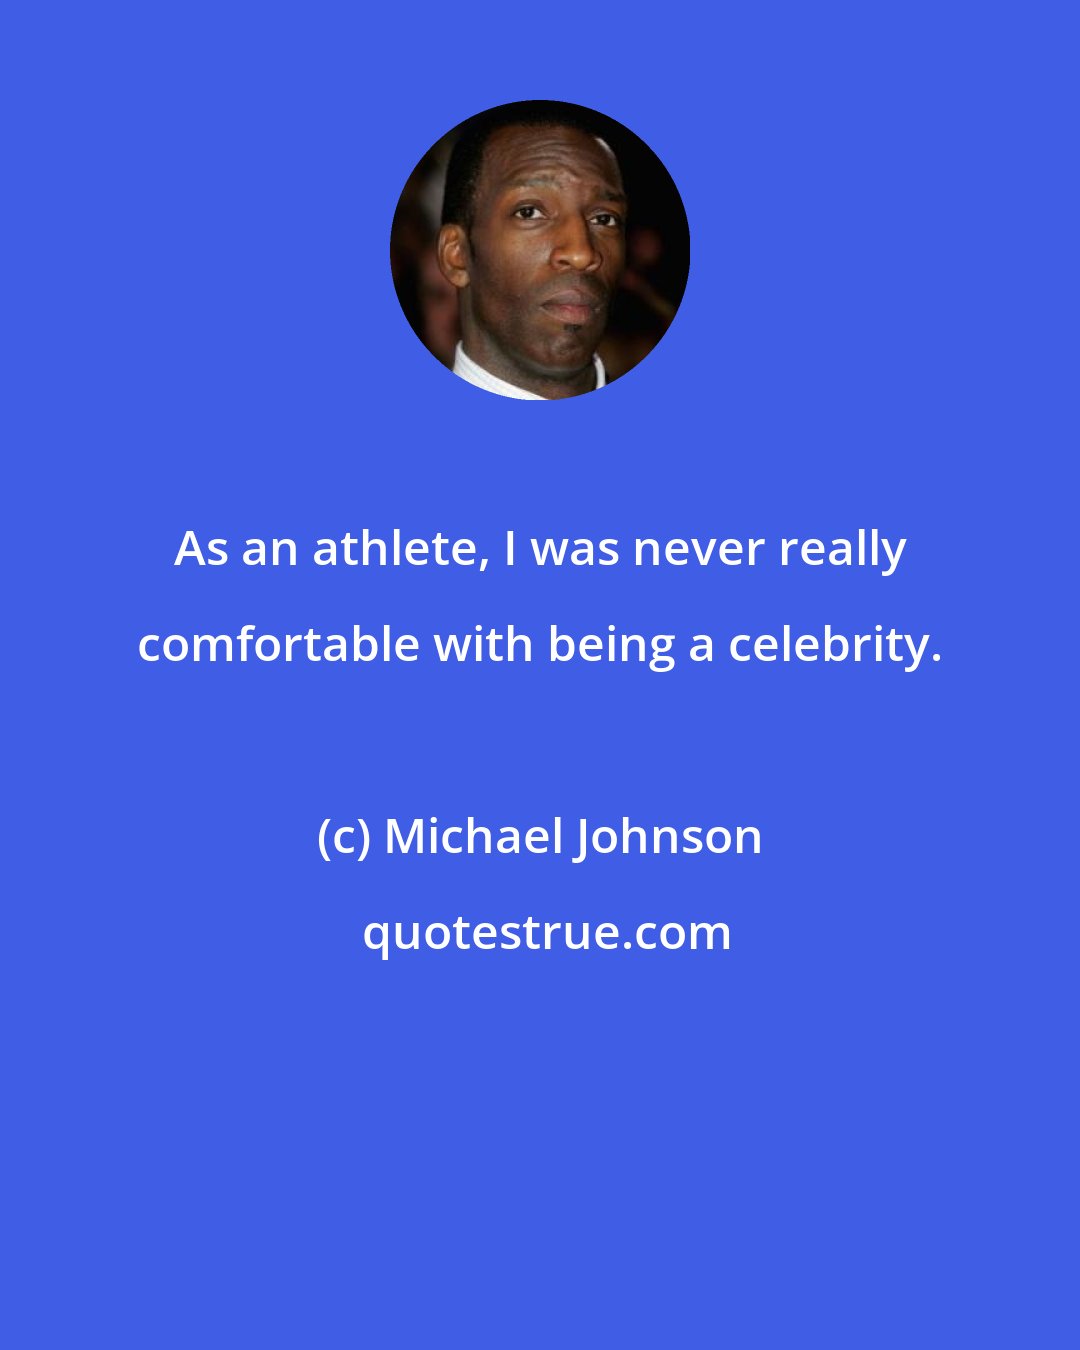 Michael Johnson: As an athlete, I was never really comfortable with being a celebrity.